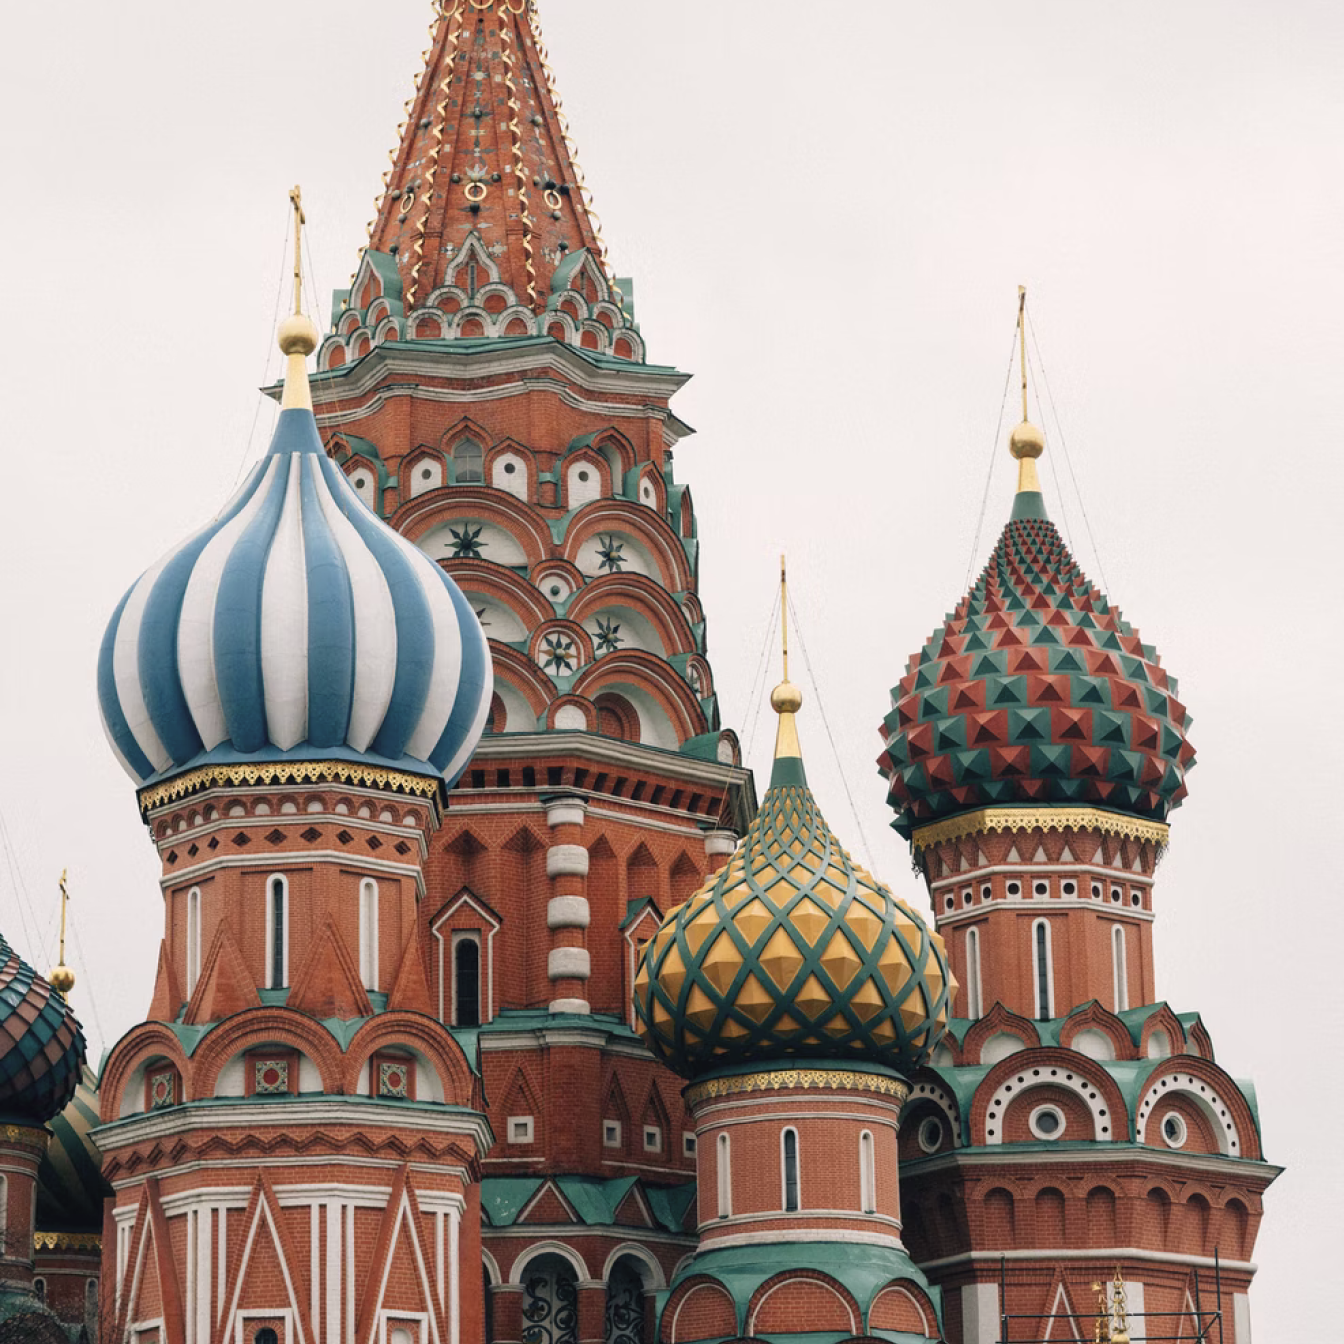 Saint Basil's Cathedral in Moscow, an Orthodox church with elaborate red towers and brightly painted onion shaped domes.